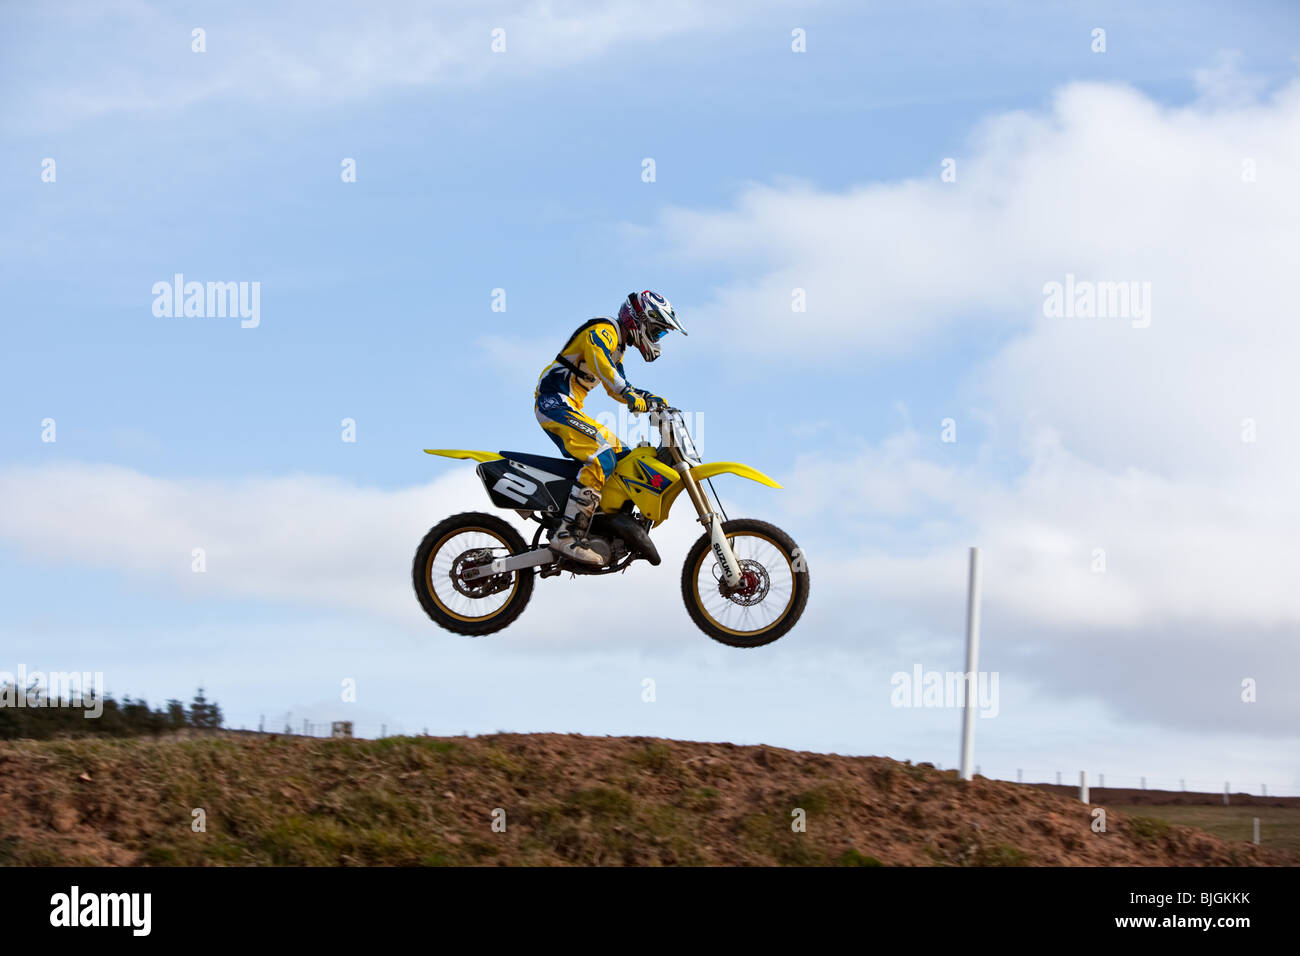 A rider on a yellow Suzuki motocross bike jumping in the air Stock Photo